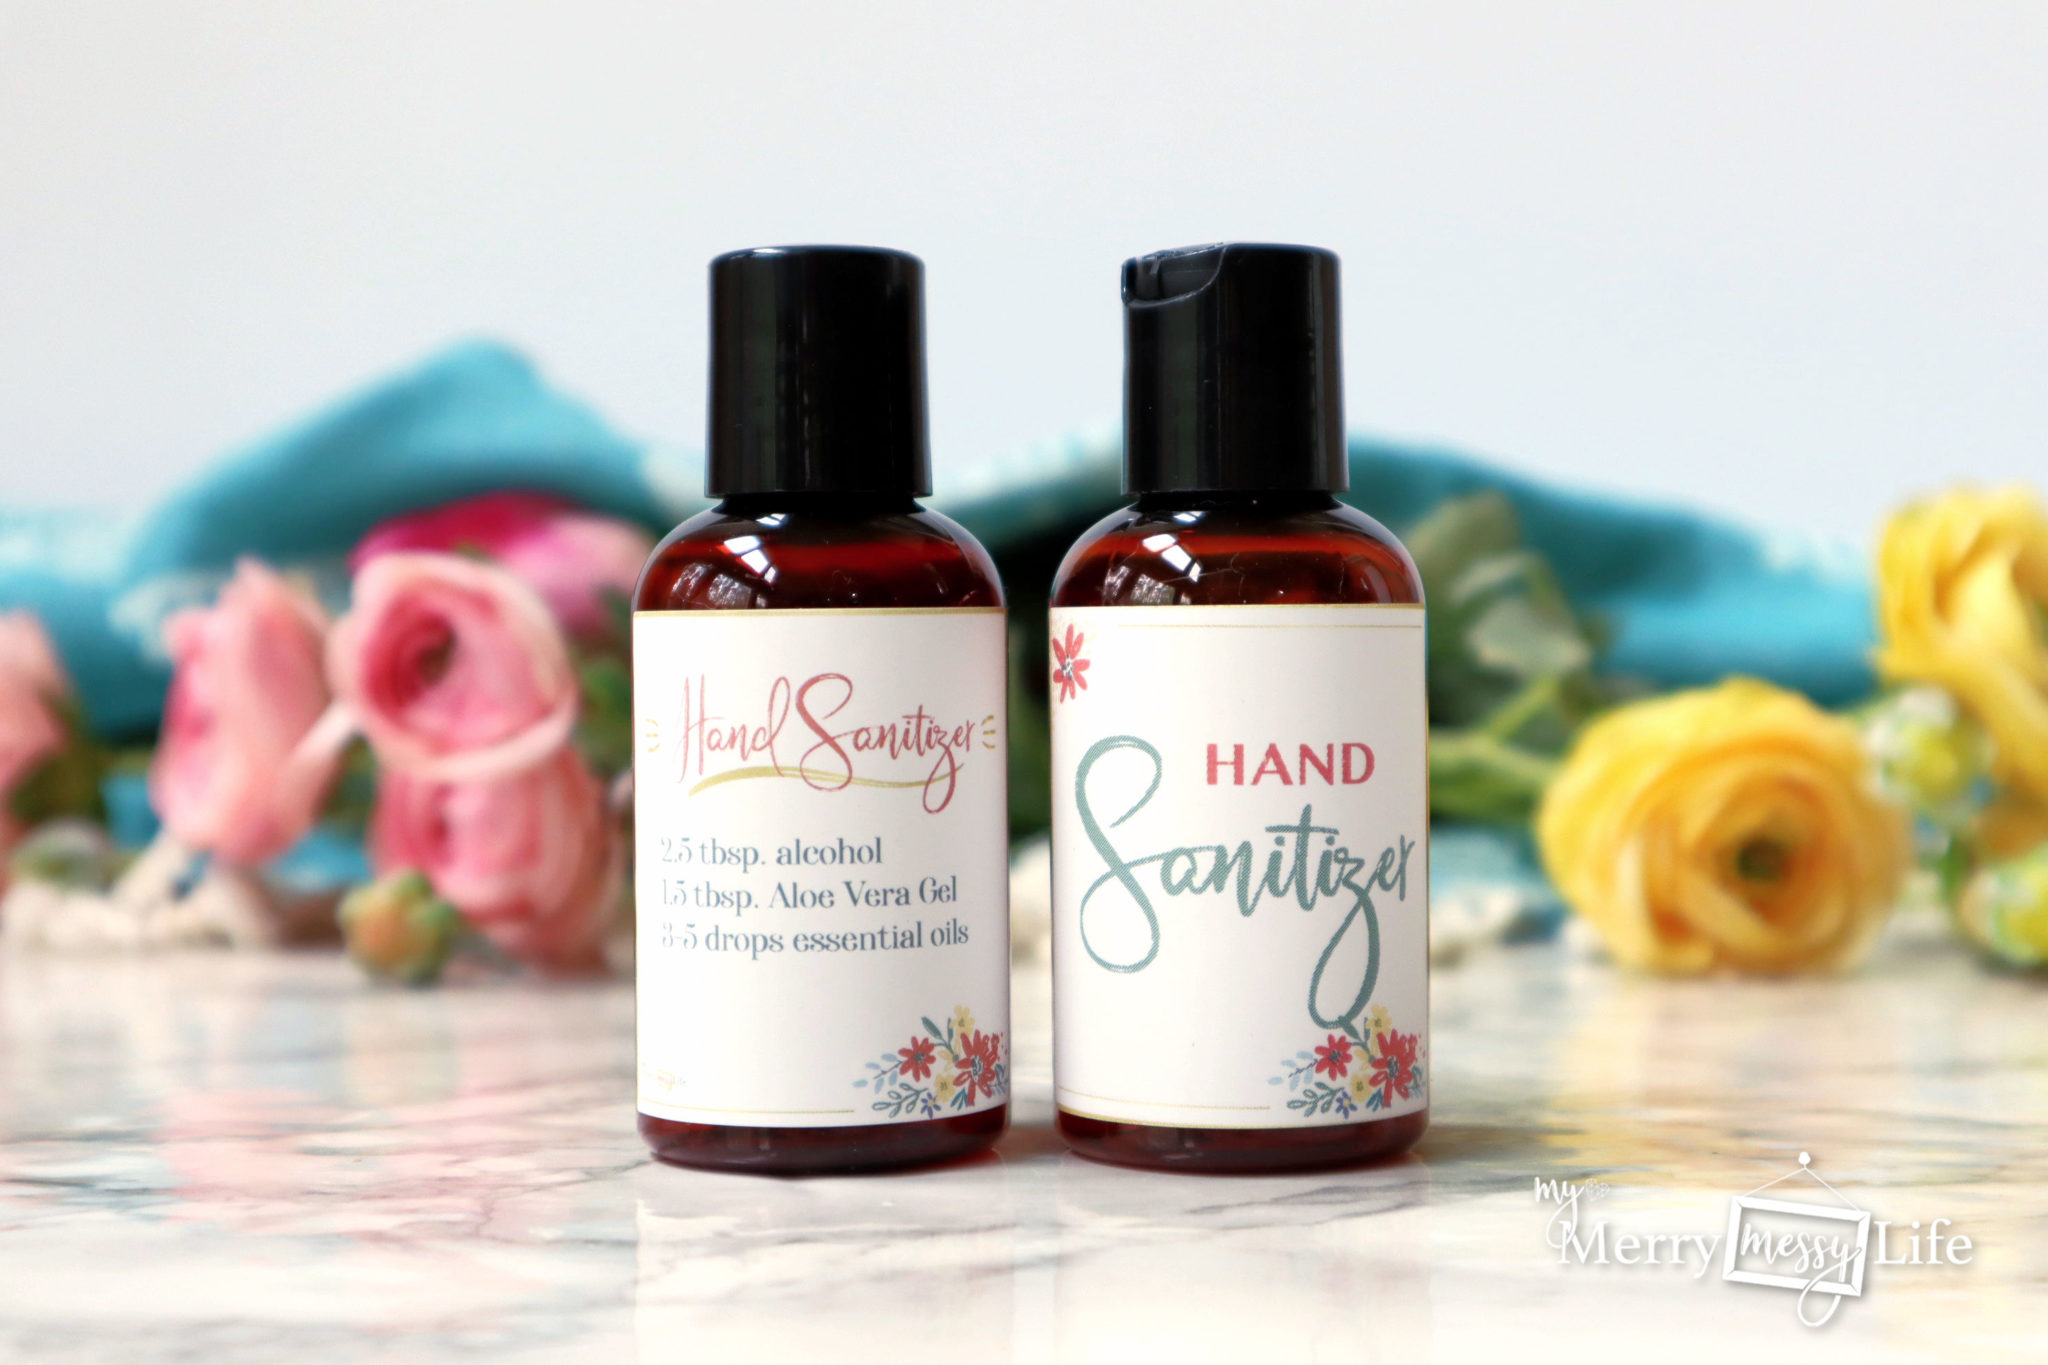 DIY Natural Hand Sanitizer Recipe - CDC approved with an alcohol base, essential oils and aloe vera